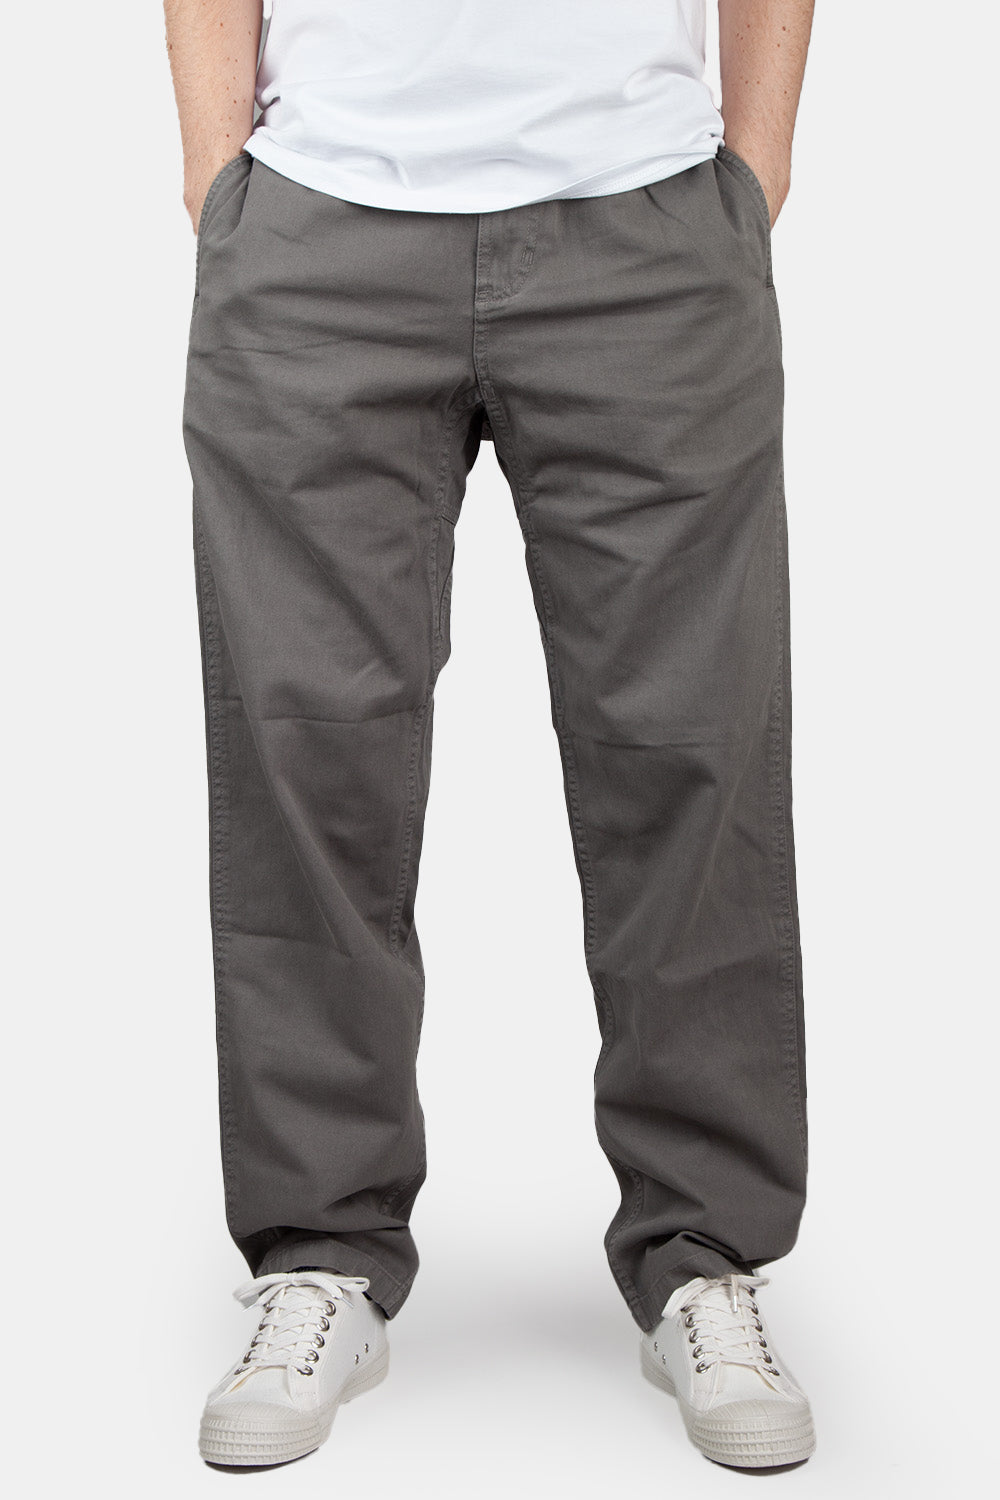 Gramicci G Pants Double-Ringspun Organic Cotton Twill (Charcoal Grey) | Number Six